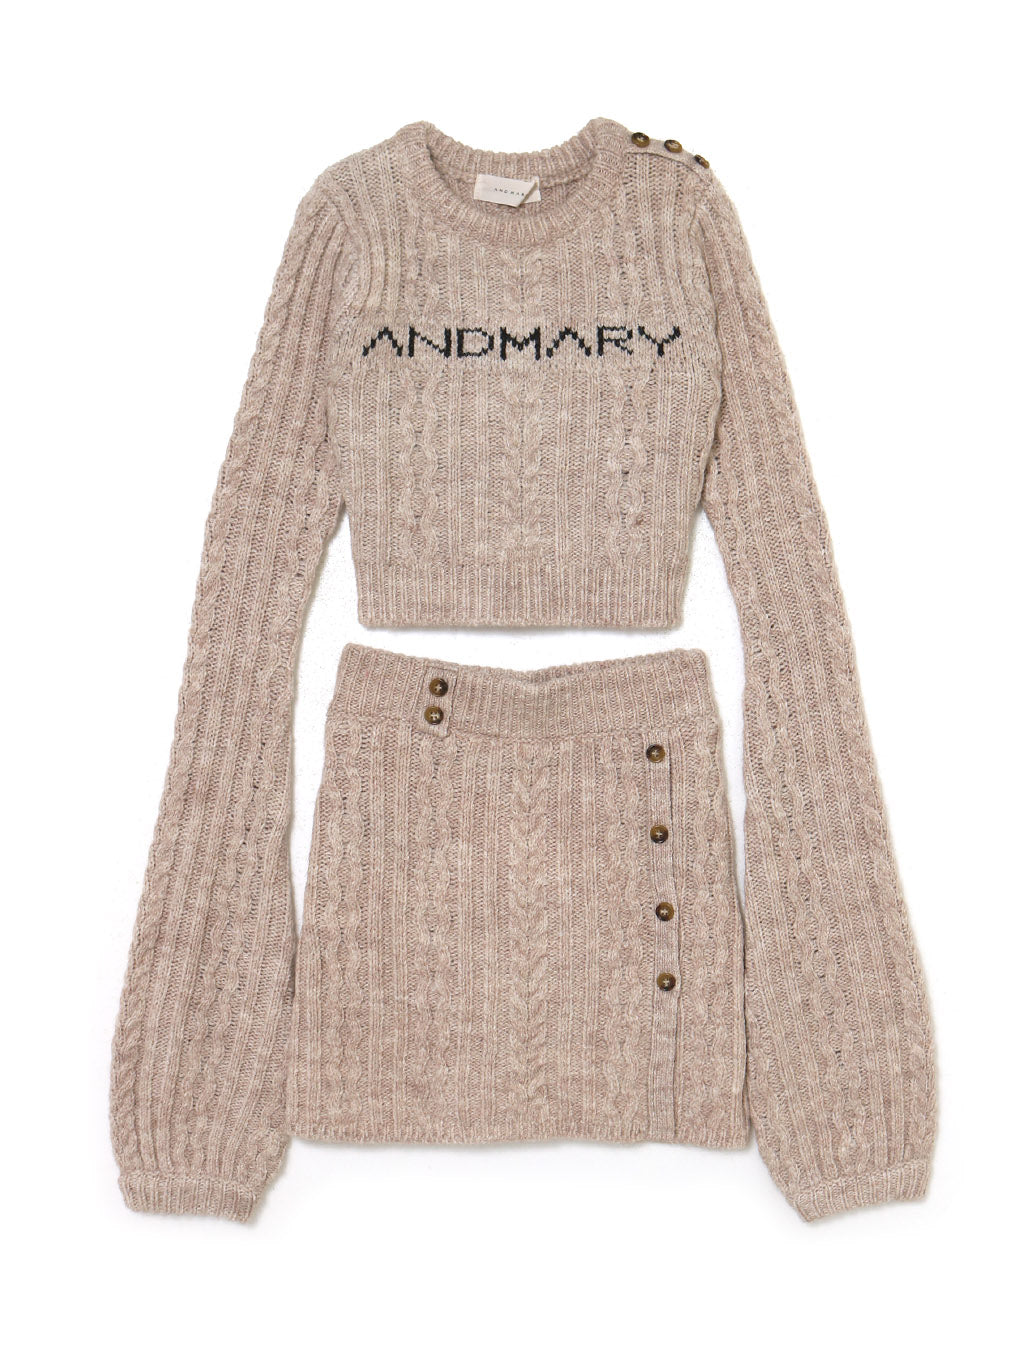 ANDMARY Marie knit set up ベージュ初コメ失礼致します